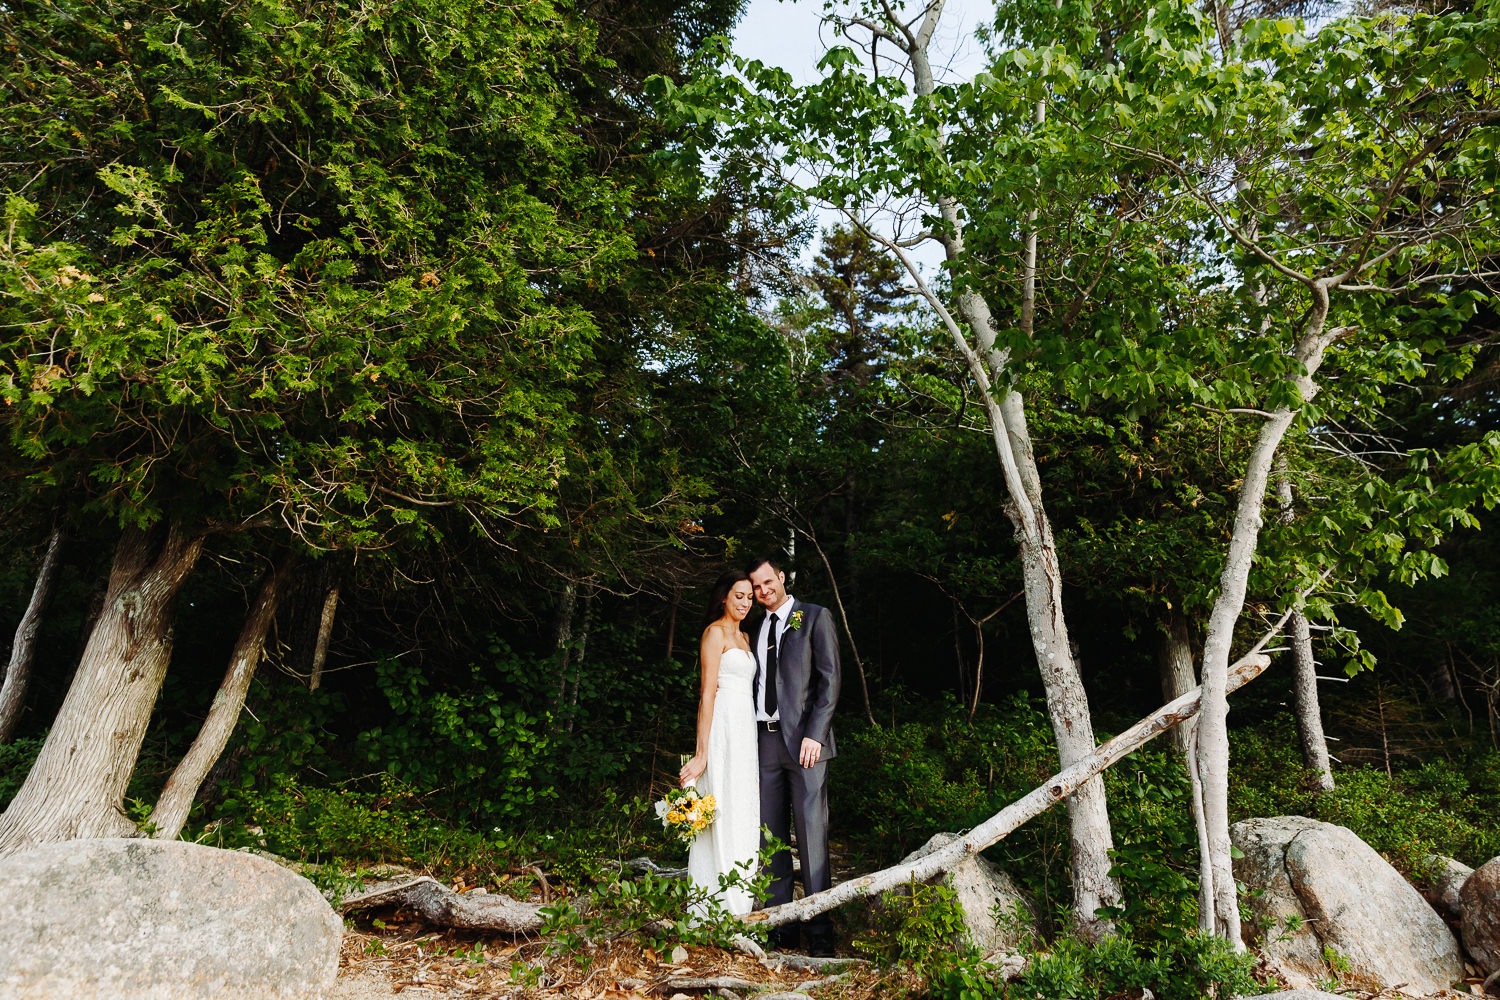 Bride and groom standing in the woods during elopement at Jordan Pond in Acadia National Park.